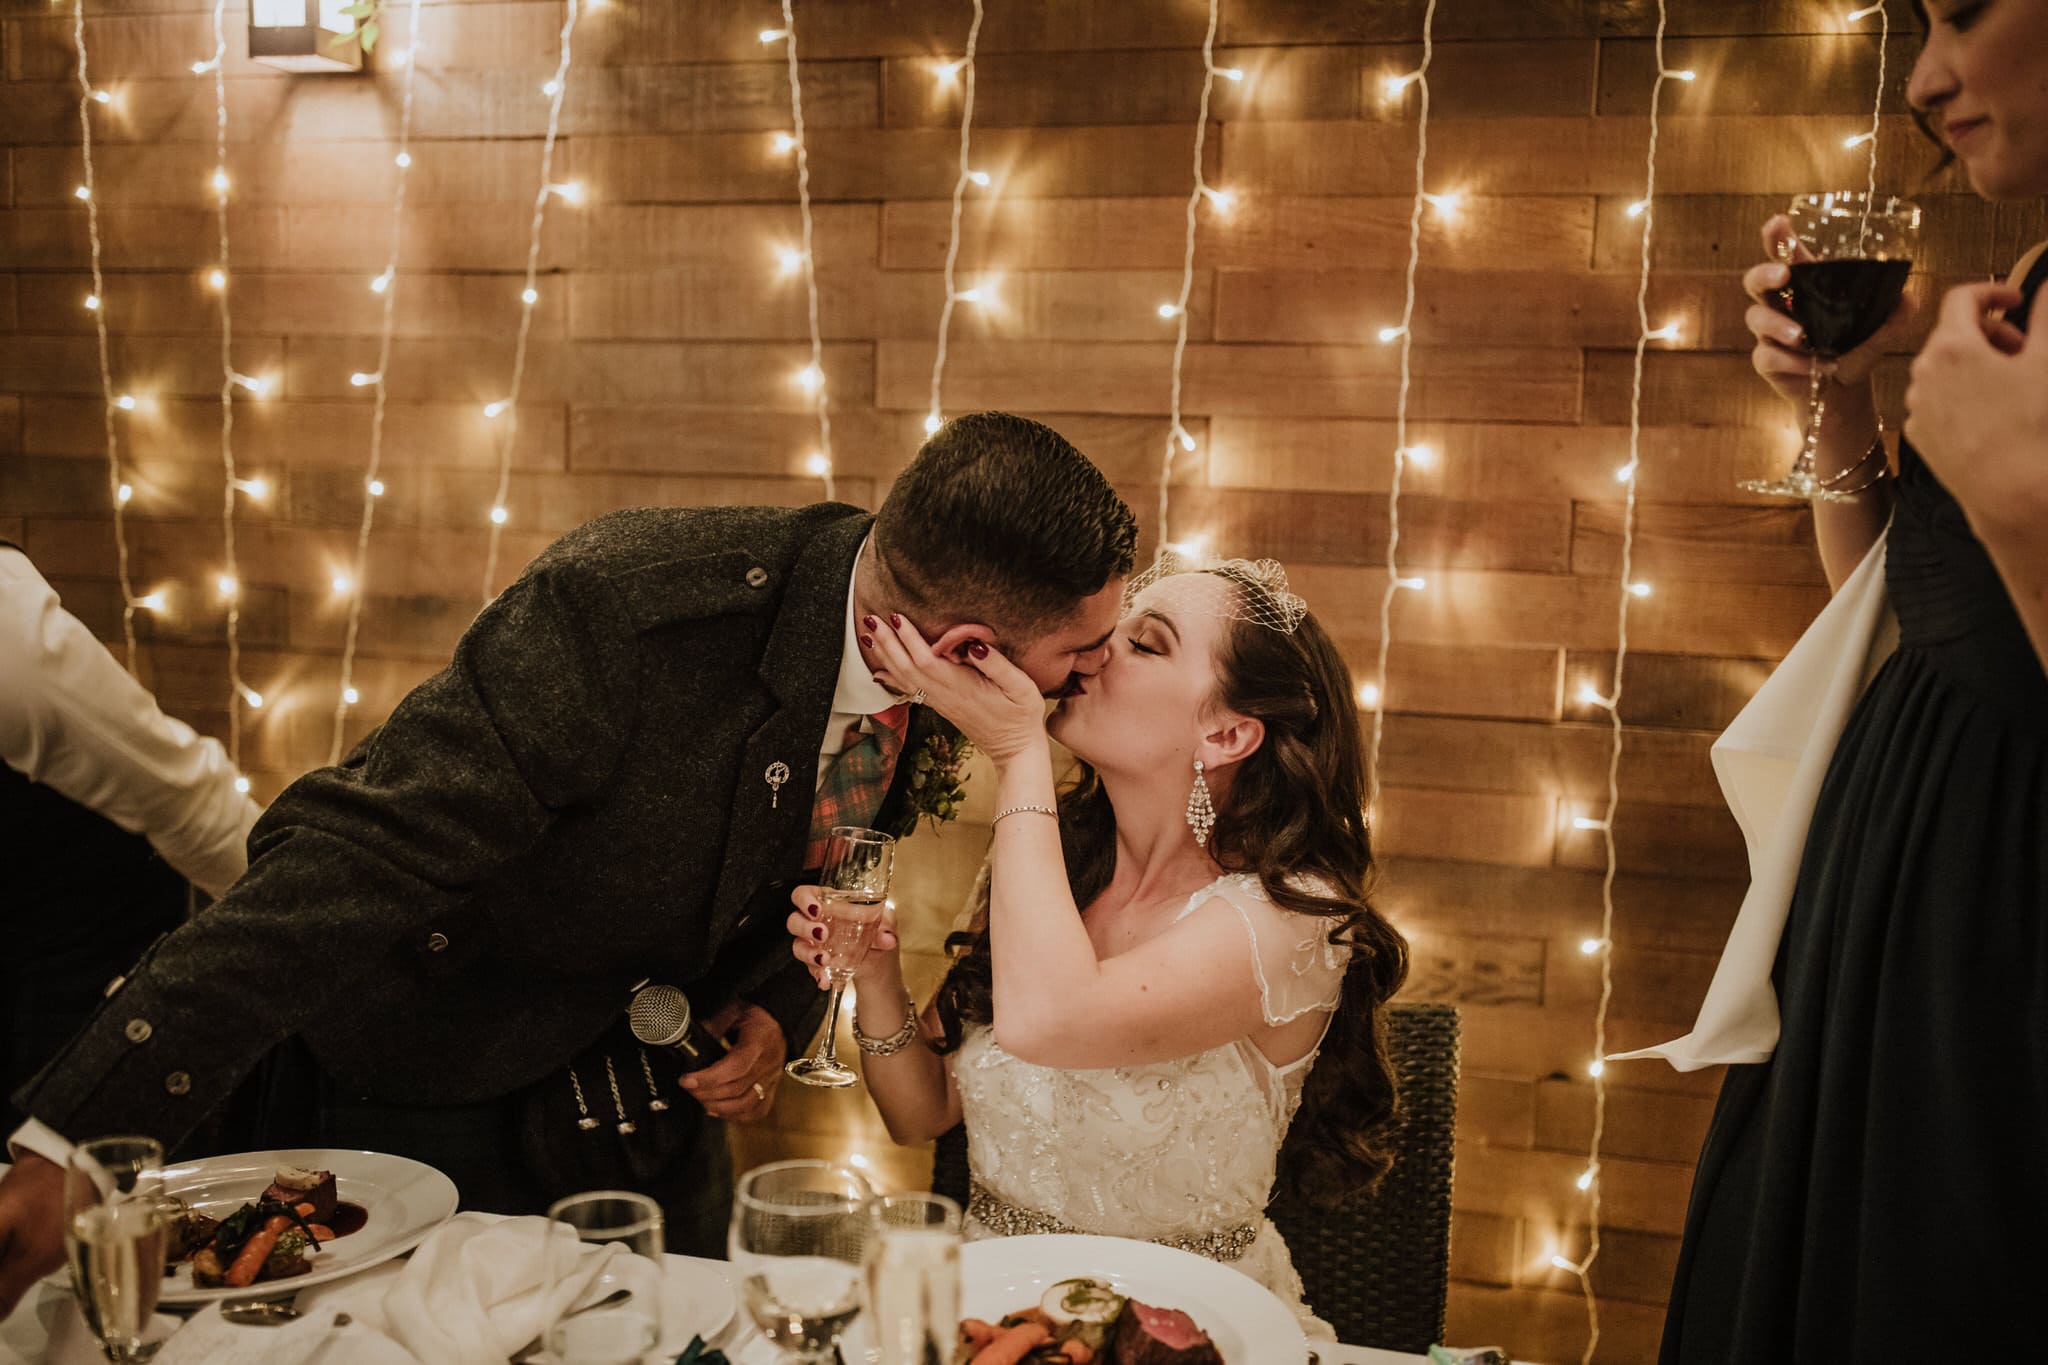 Bride and groom kiss during wedding reception at Brew Creek Centre Whistler. Destination wedding photographer Brent Calis.